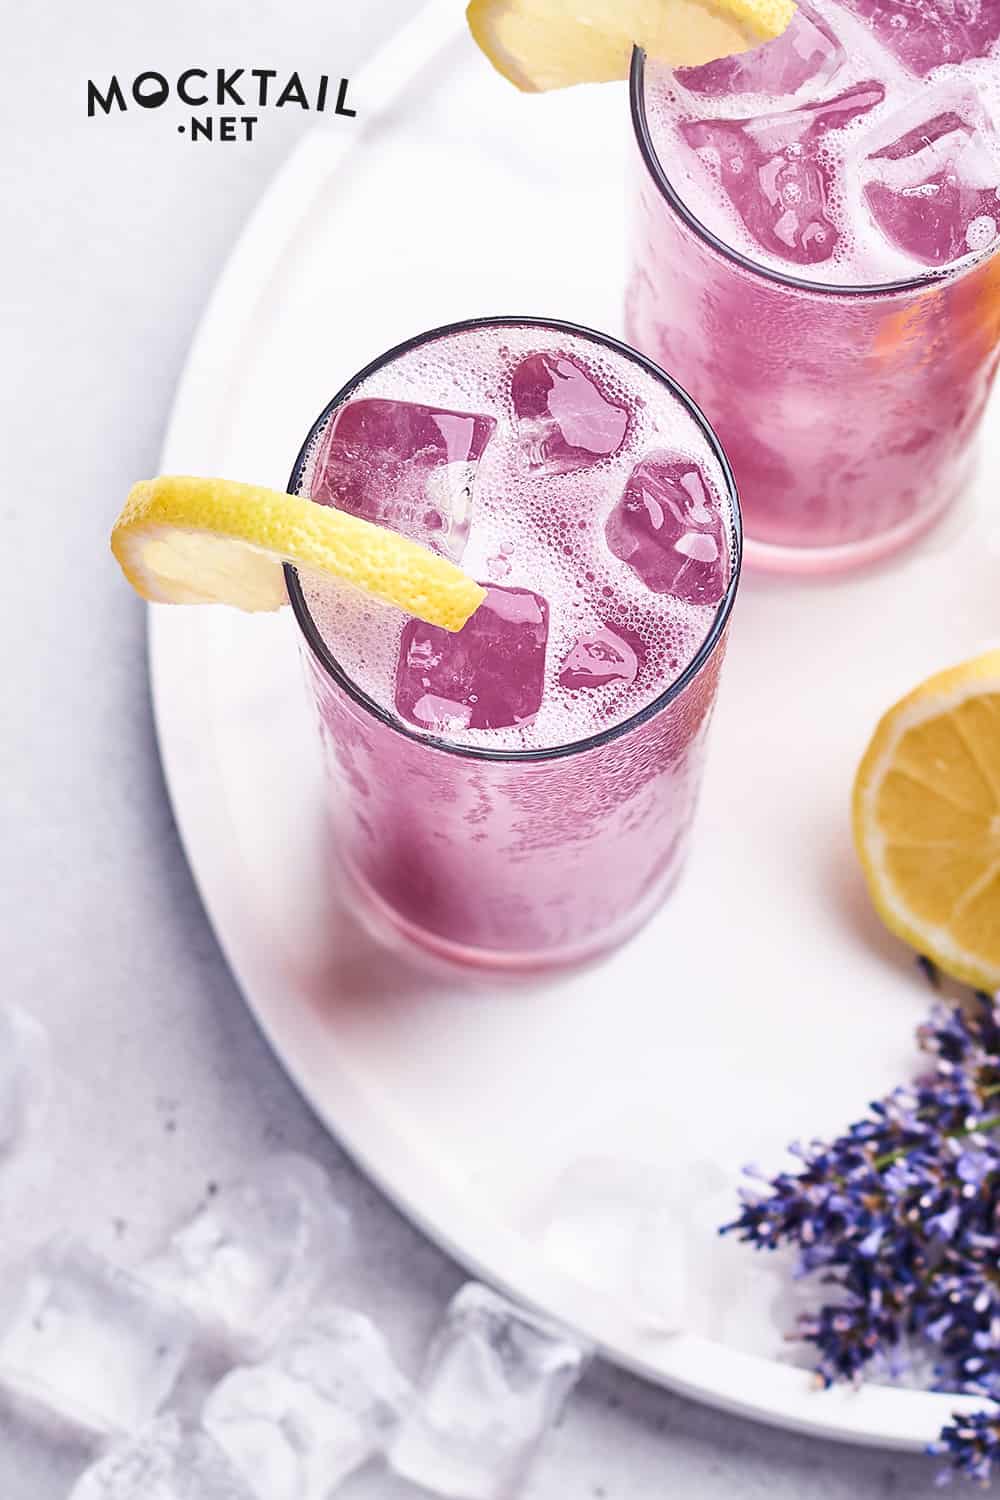 beautiful, flavorful, fruity drink.